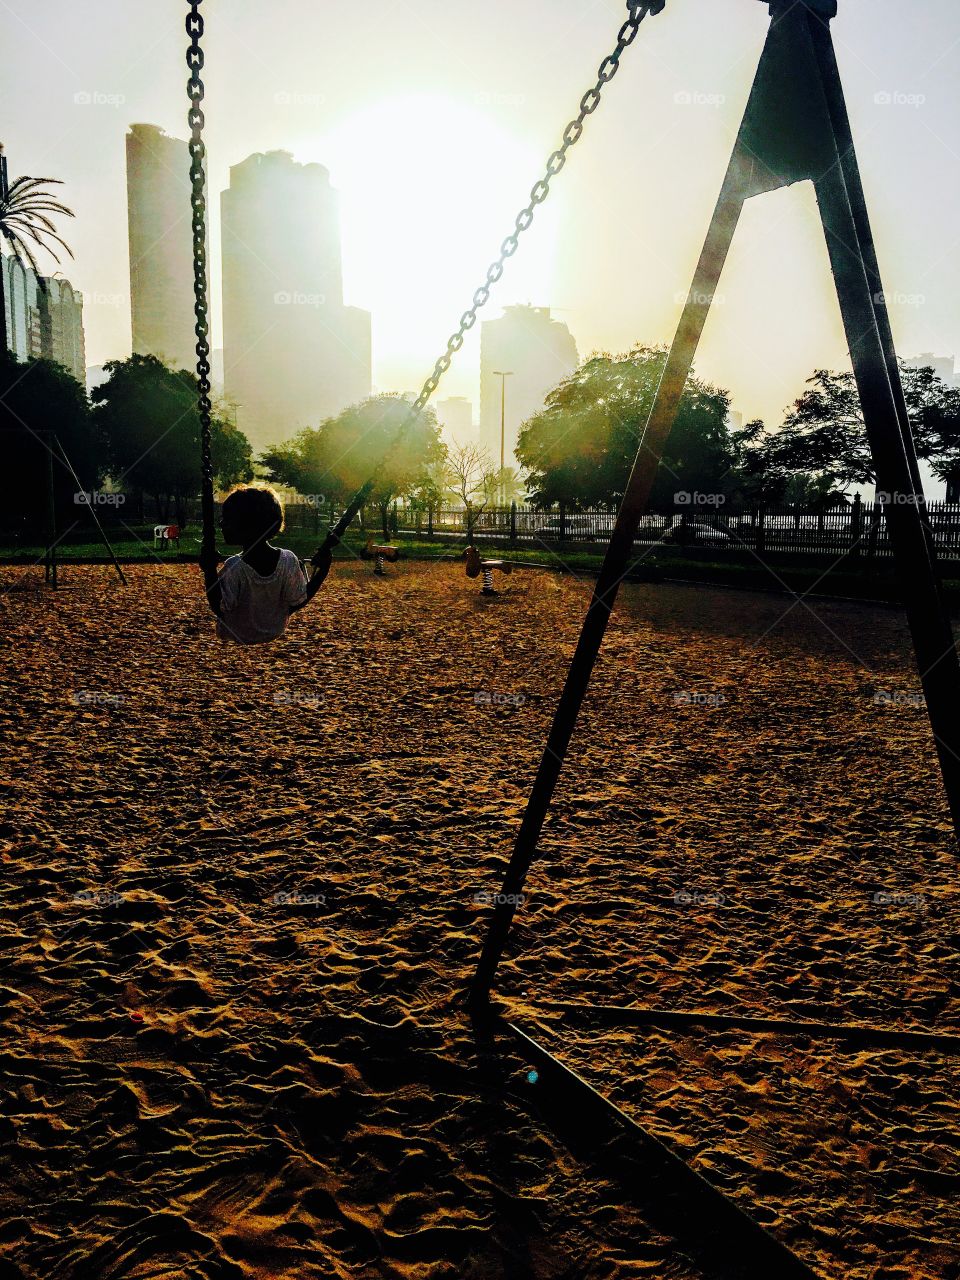 Swing into the sunset 